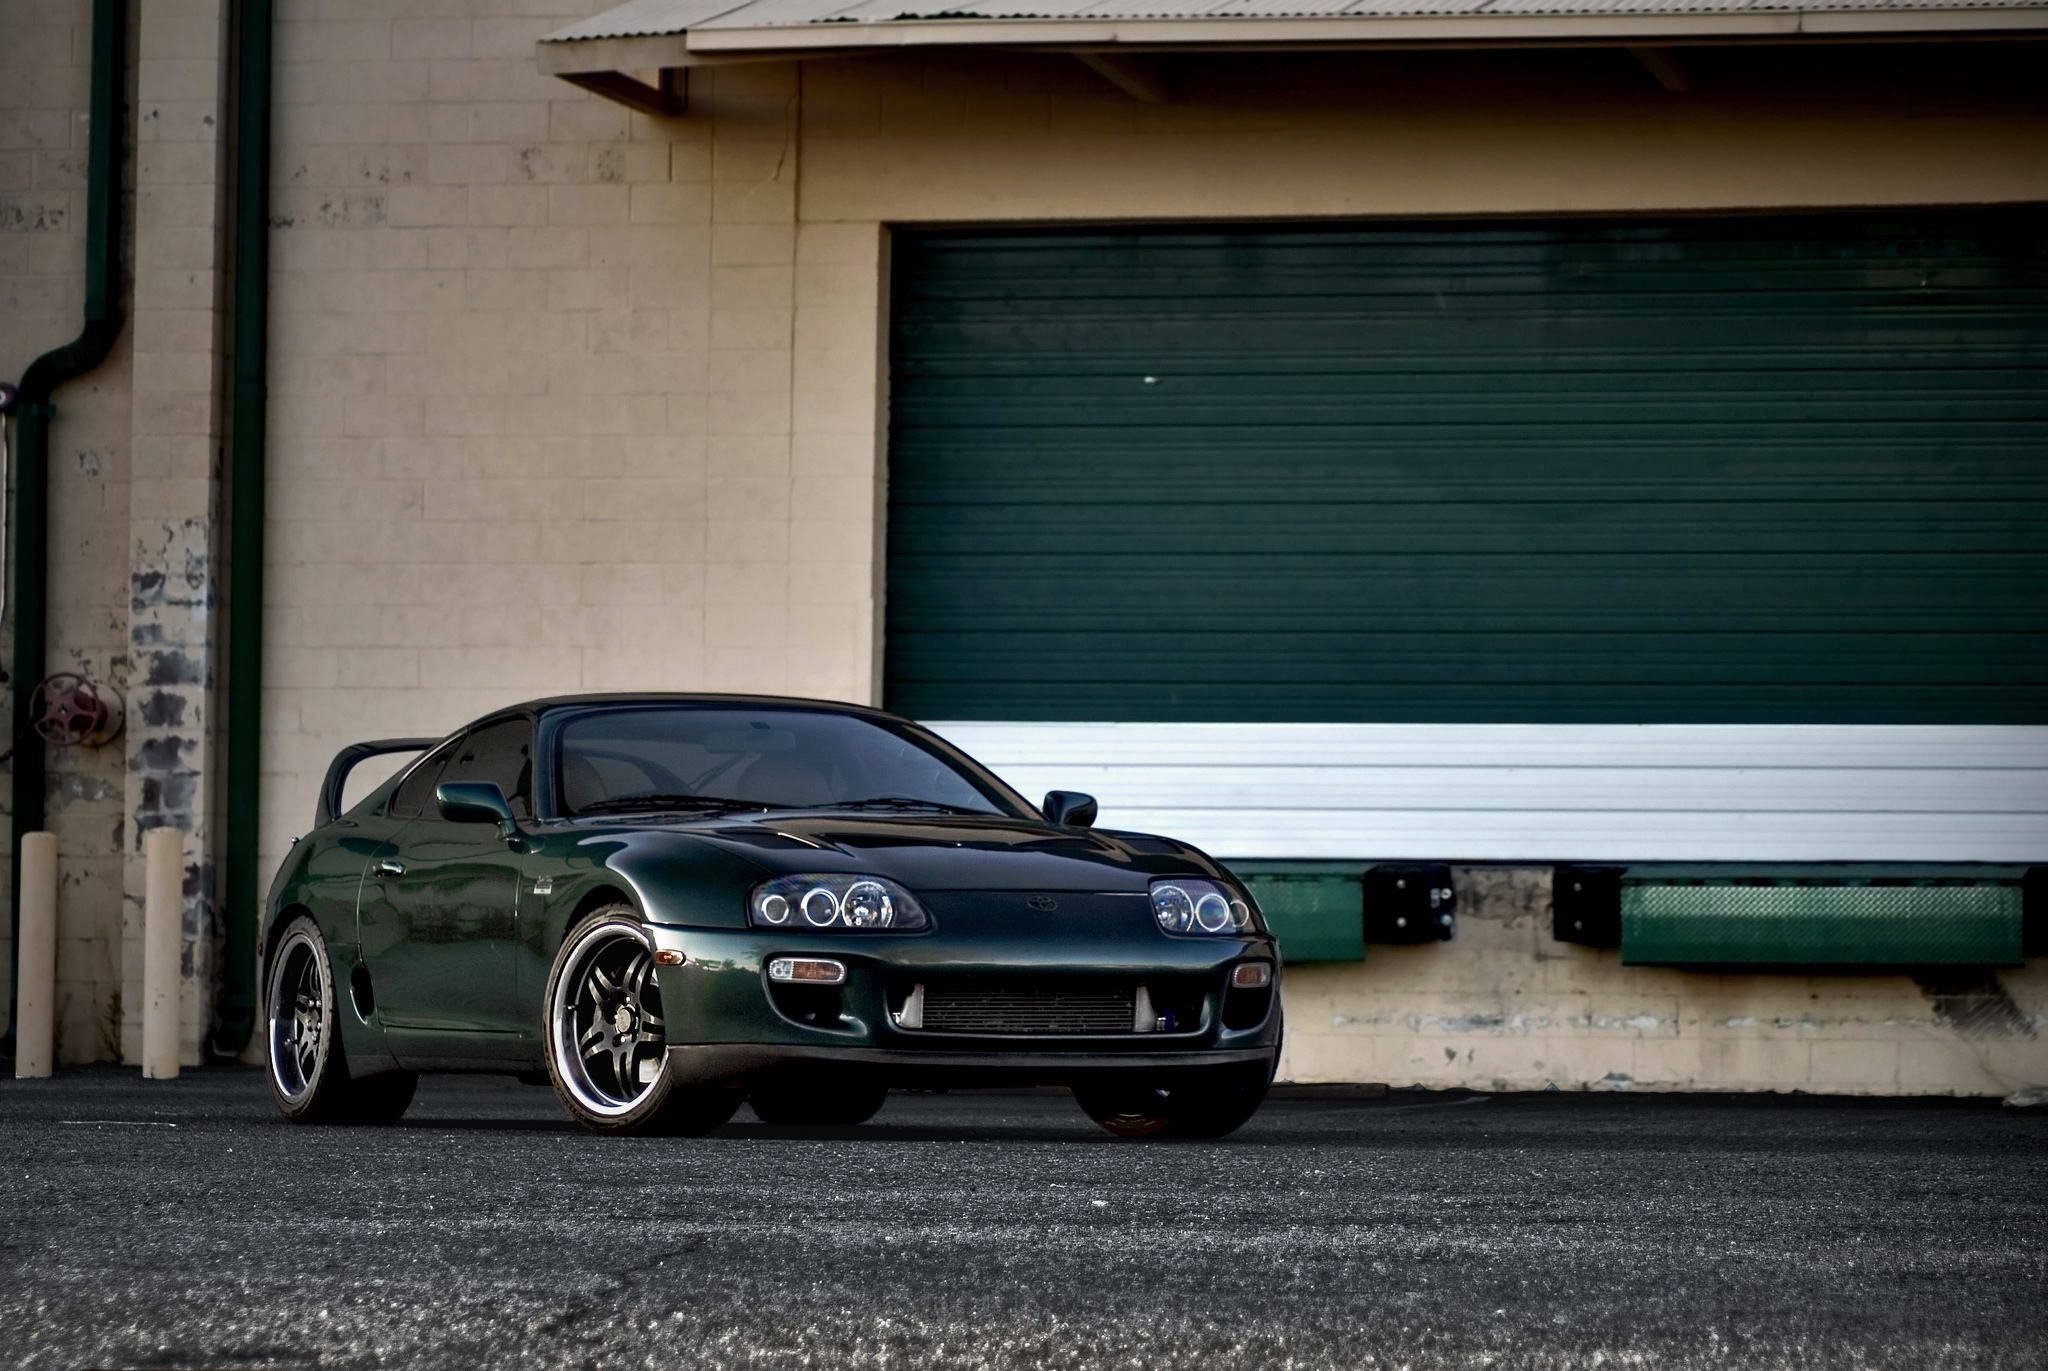 supra, toyota, front view, cars, green